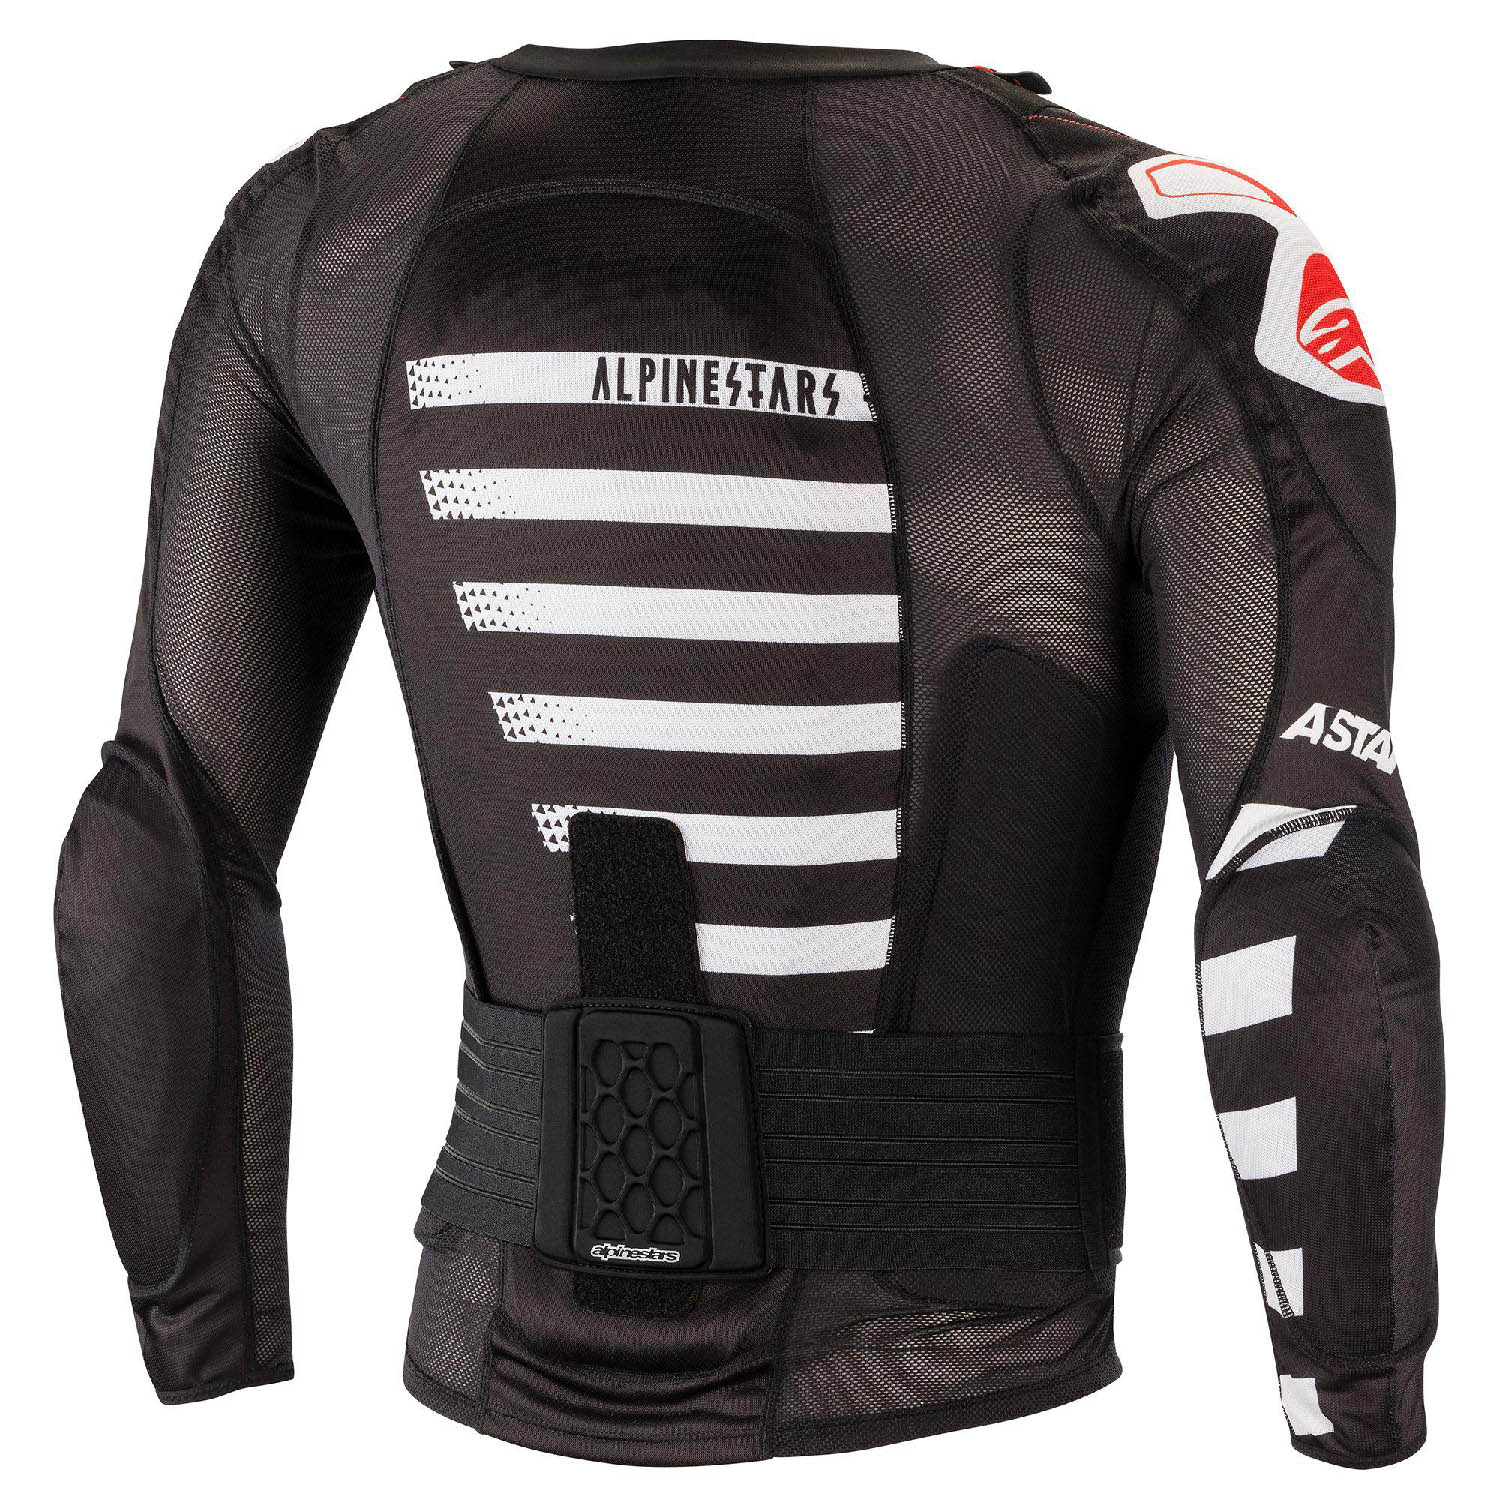 Ð—Ð°Ñ‰Ð¸Ñ‚Ð° Ñ‚ÑƒÐ»Ð¾Ð²Ð¸Ñ‰Ð° ALPINESTARS SEQUENCE PROTECTION JACKET LONG SLEEVE Ð²Ð¸Ð´ Ñ�Ð·Ð°Ð´Ð¸, Ñ‡Ñ‘Ñ€Ð½Ð¾-Ð±ÐµÐ»Ð¾-ÐºÑ€Ð°Ñ�Ð½Ð¾Ð³Ð¾ Ñ†Ð²ÐµÑ‚Ð° ÐºÑƒÐ¿Ð¸Ñ‚ÑŒ Ð¿Ð¾ Ð½Ð¸Ð·ÐºÐ¾Ð¹ Ñ†ÐµÐ½Ðµ